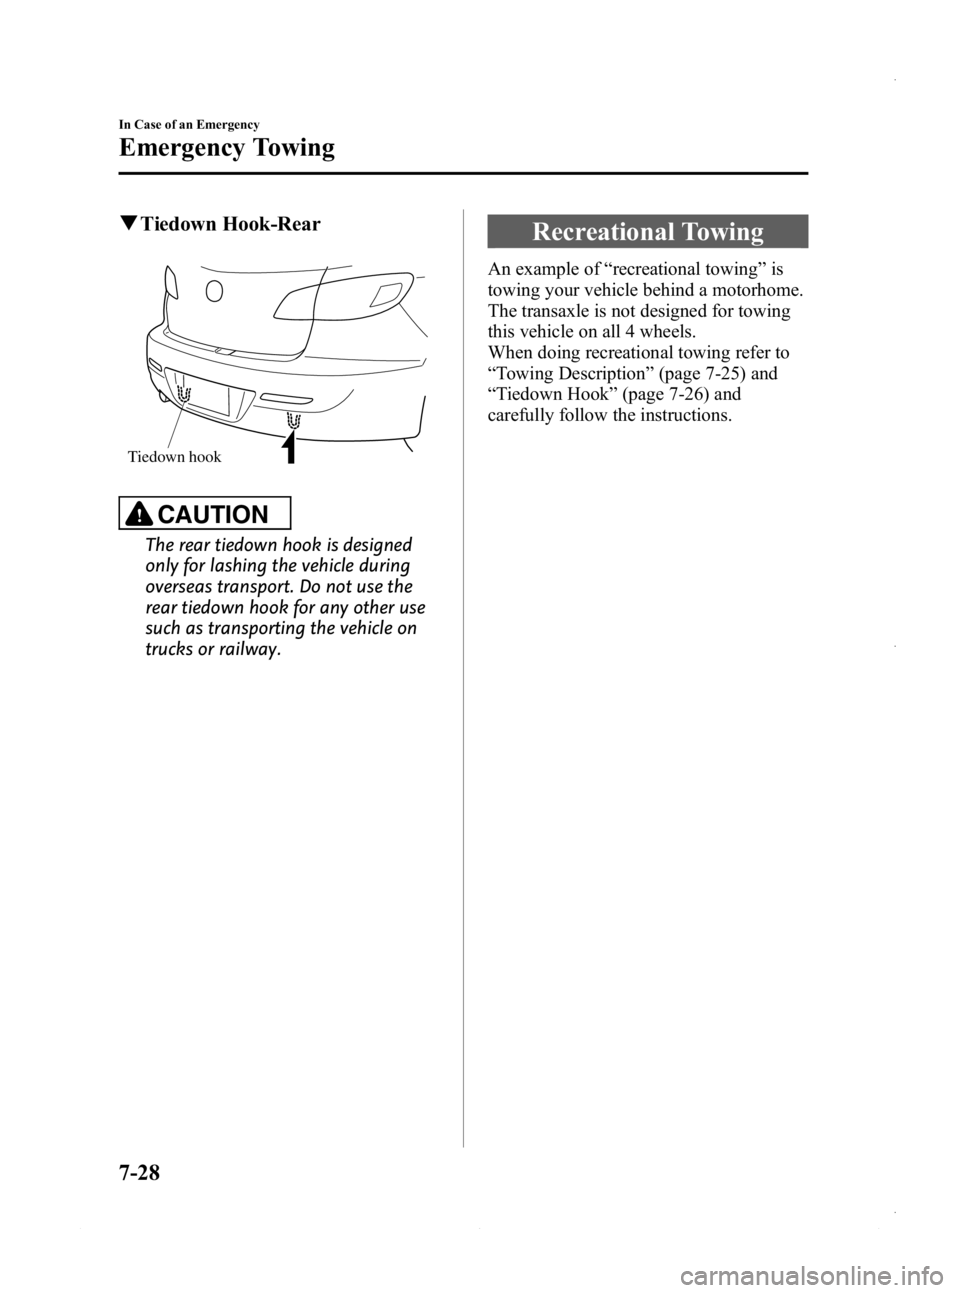 MAZDA MODEL 3 5-DOOR 2013  Owners Manual Black plate (464,1)
qTiedown Hook-Rear
Tiedown hook
CAUTION
The rear tiedown hook is designed
only for lashing the vehicle during
overseas transport. Do not use the
rear tiedown hook for any other use